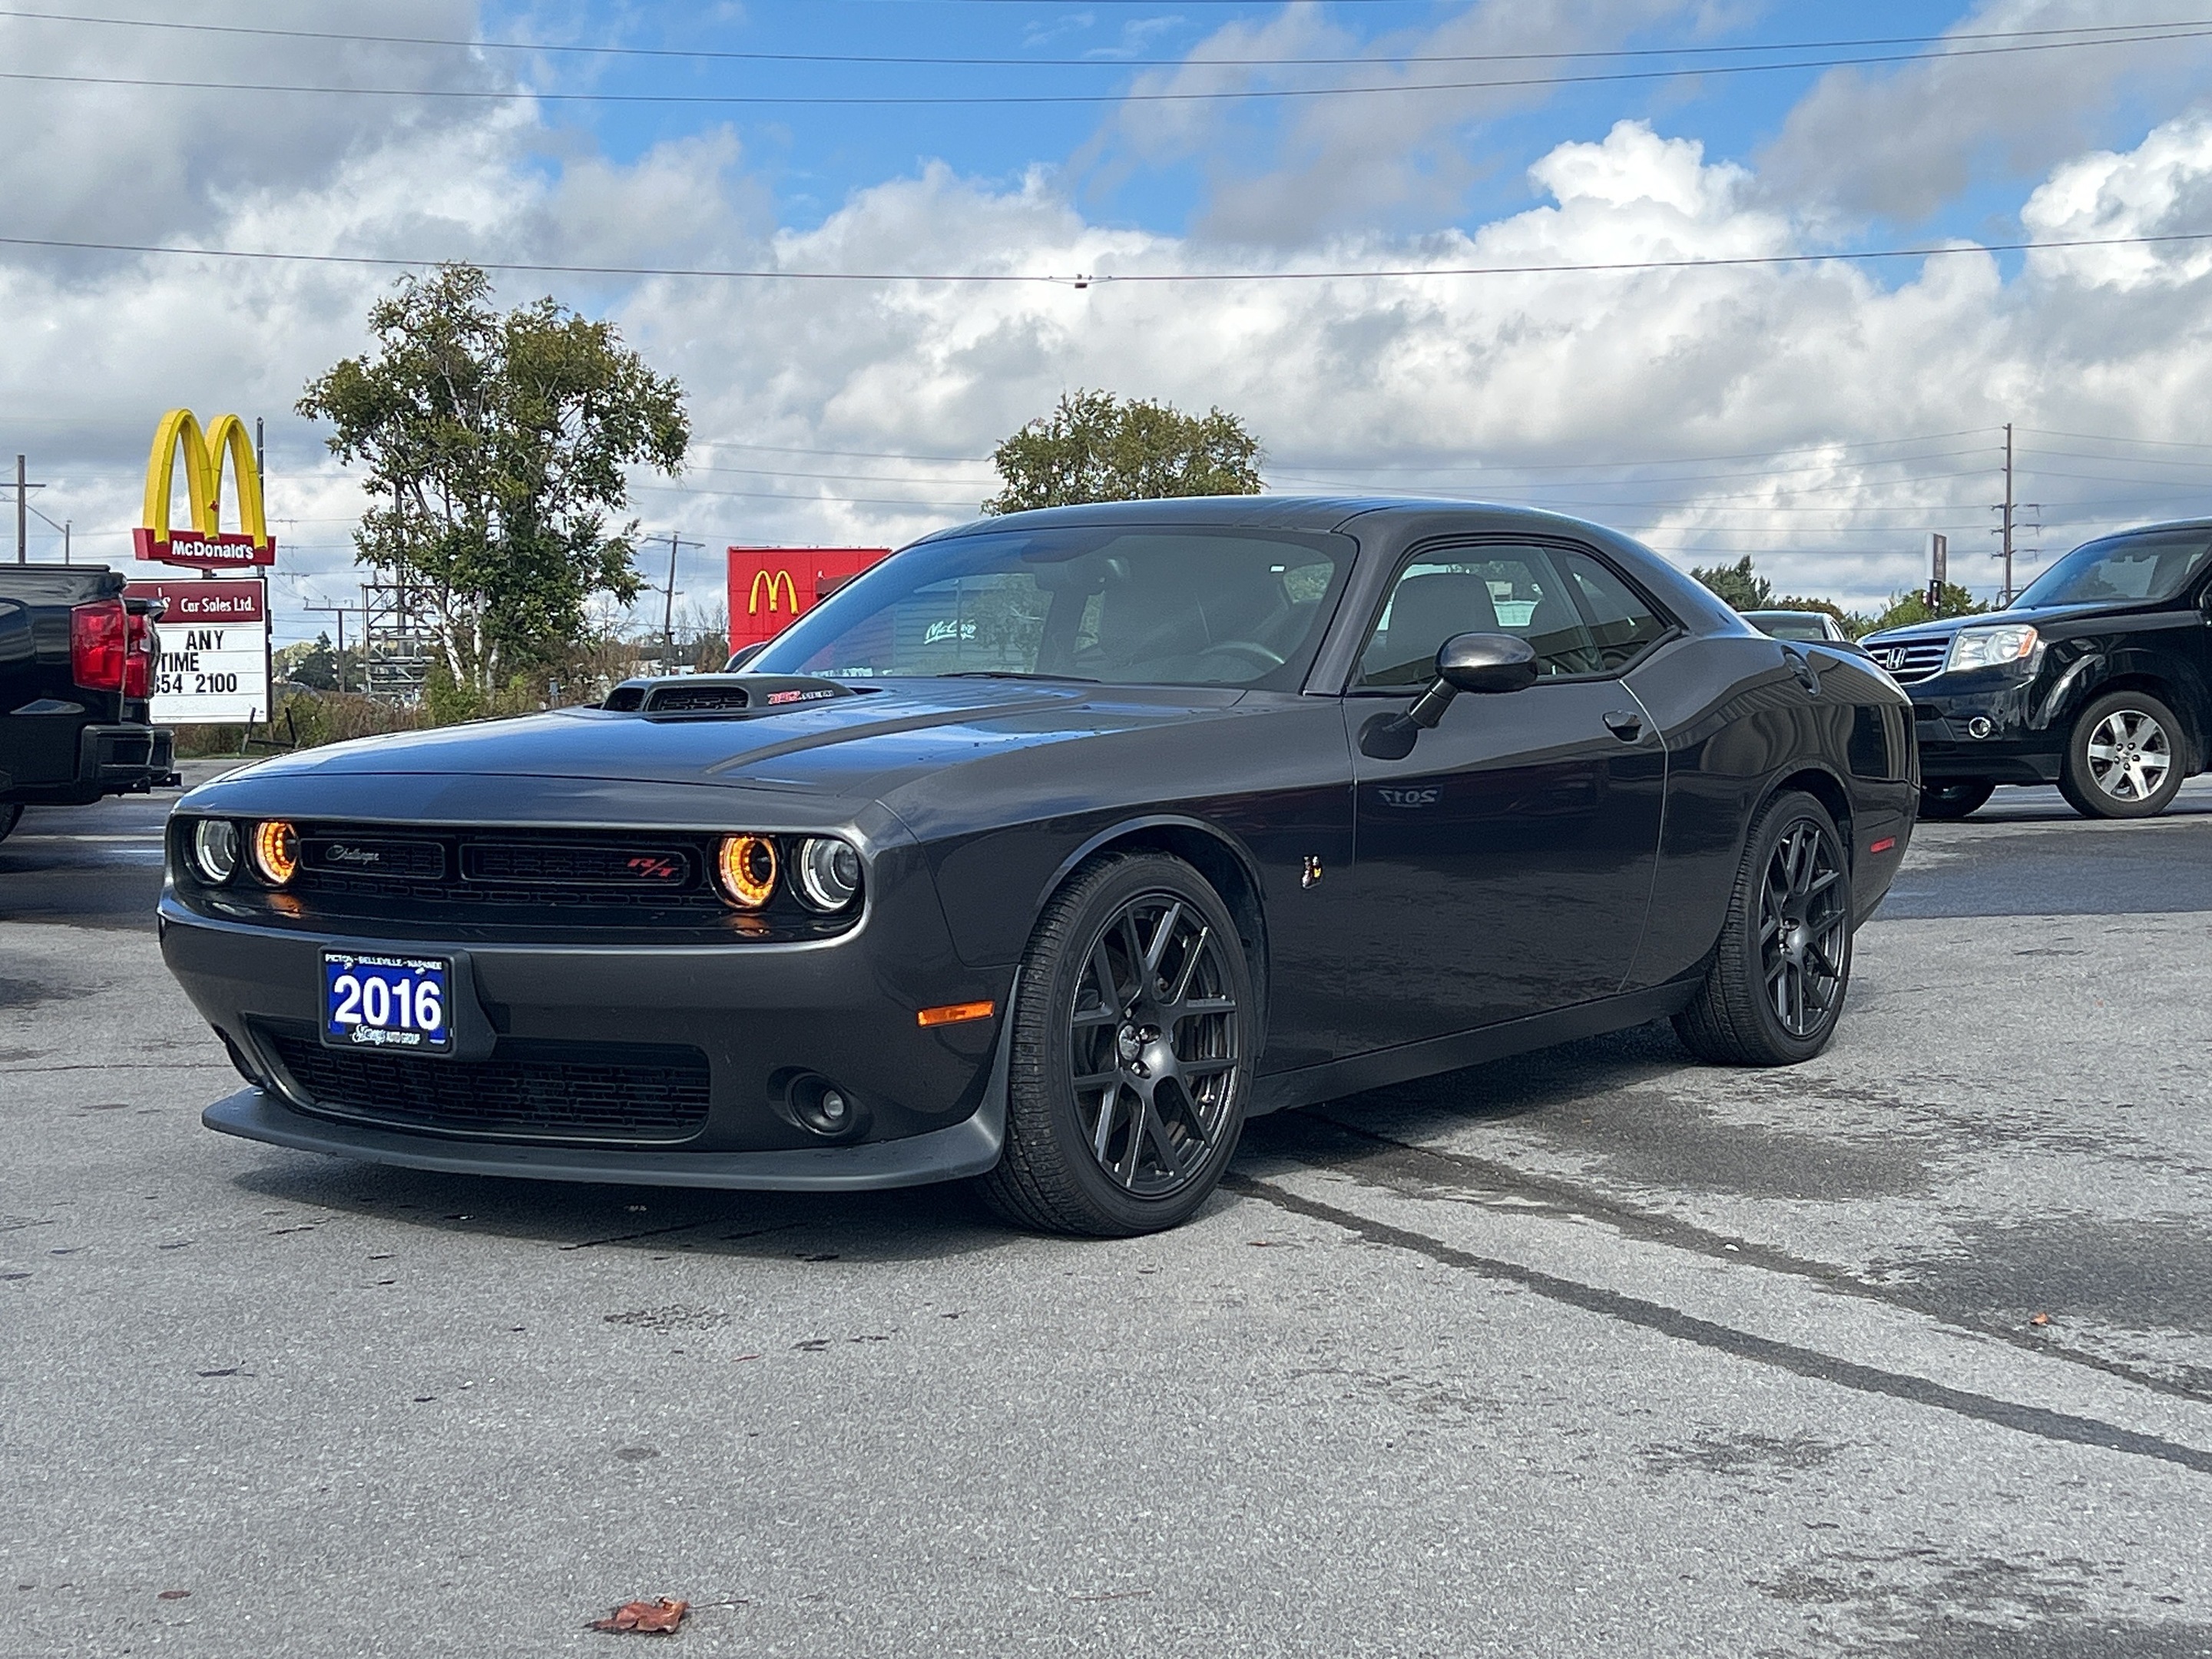 2016 Dodge Challenger R-T ScatPack Shaker 6.4L CALL NAPANEE 613-354-2100